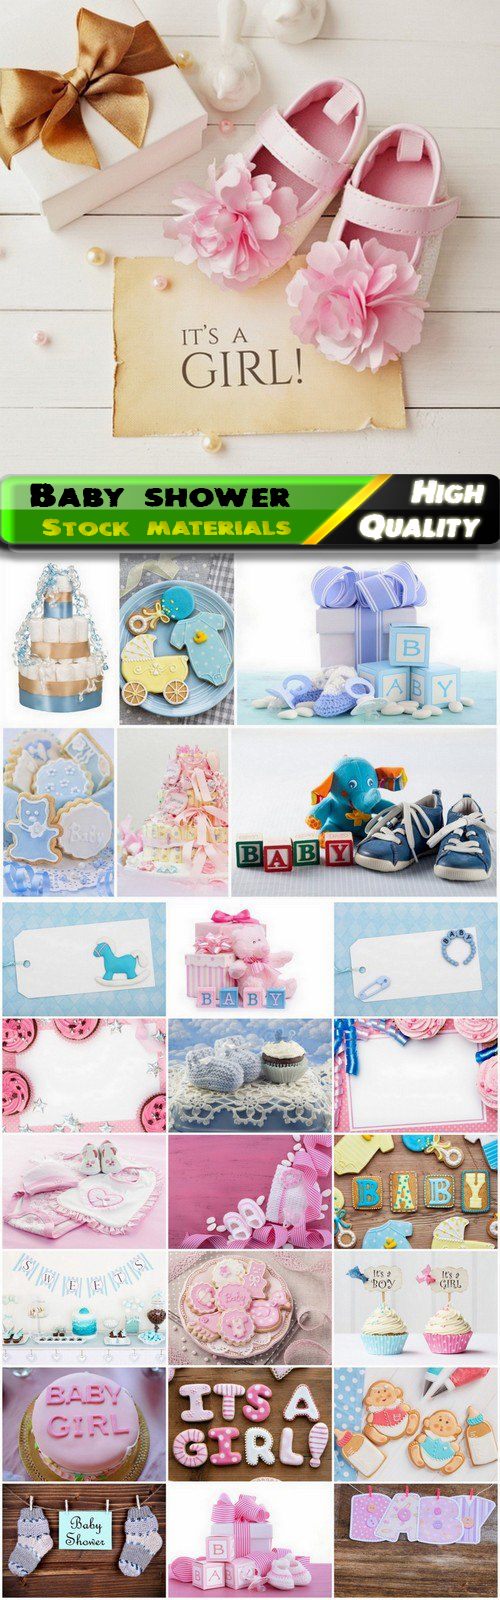 Cute its a boy and its a girl background for baby shower - 25 HQ Jpg